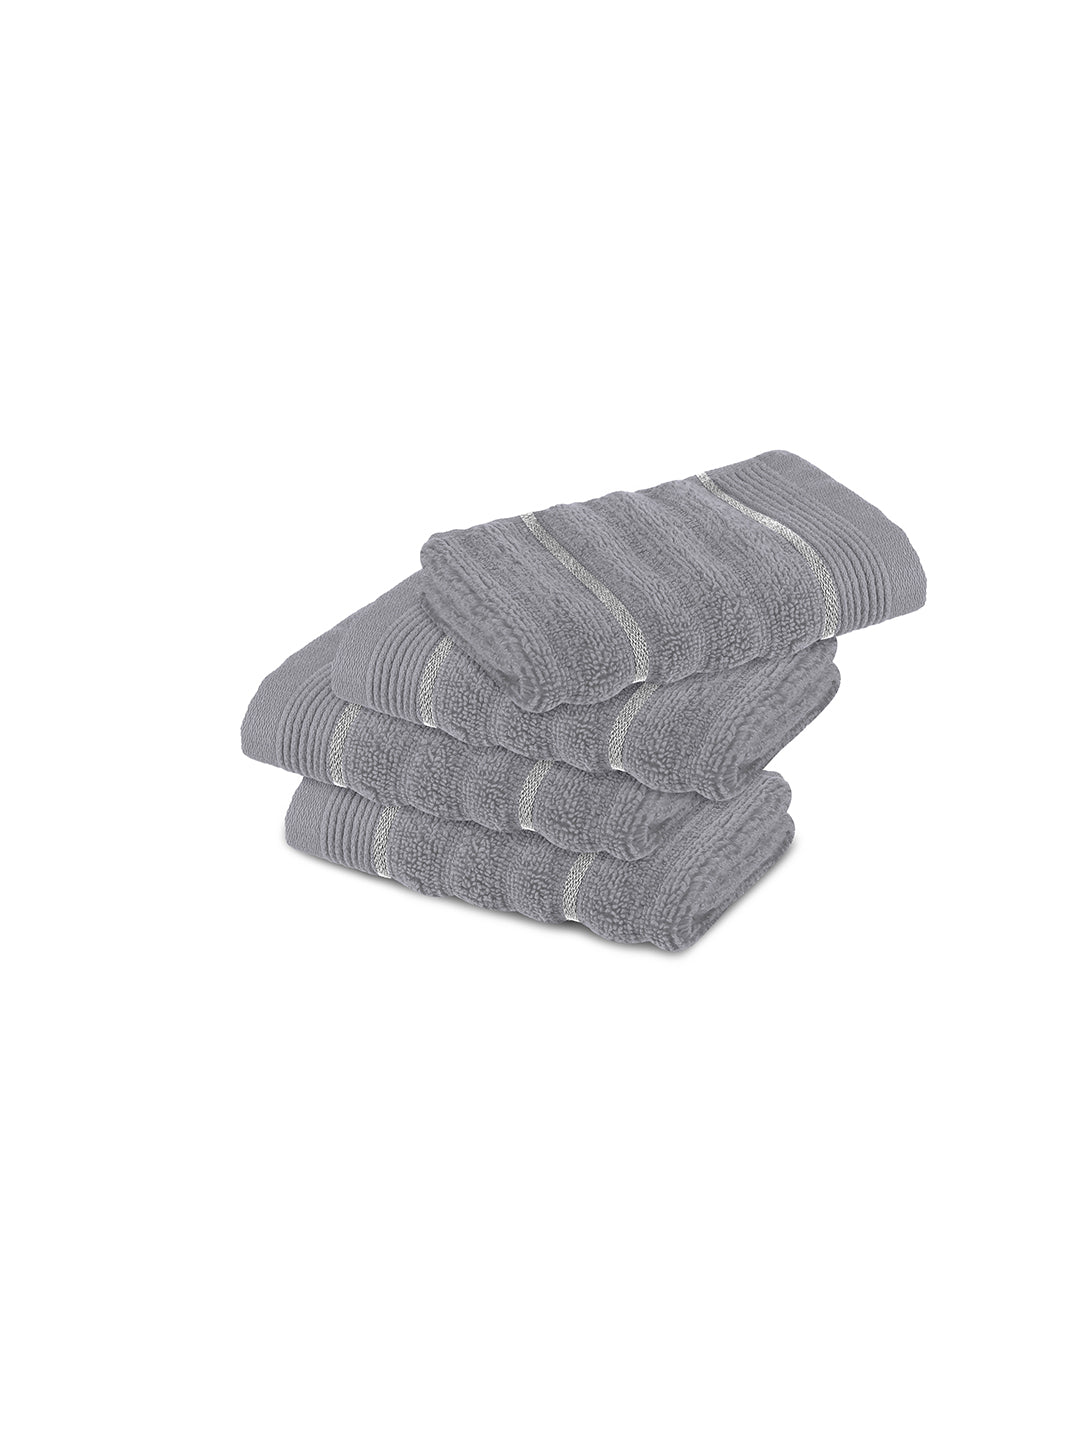 Elite Plush Quickdry Pack of 4 Face Towels